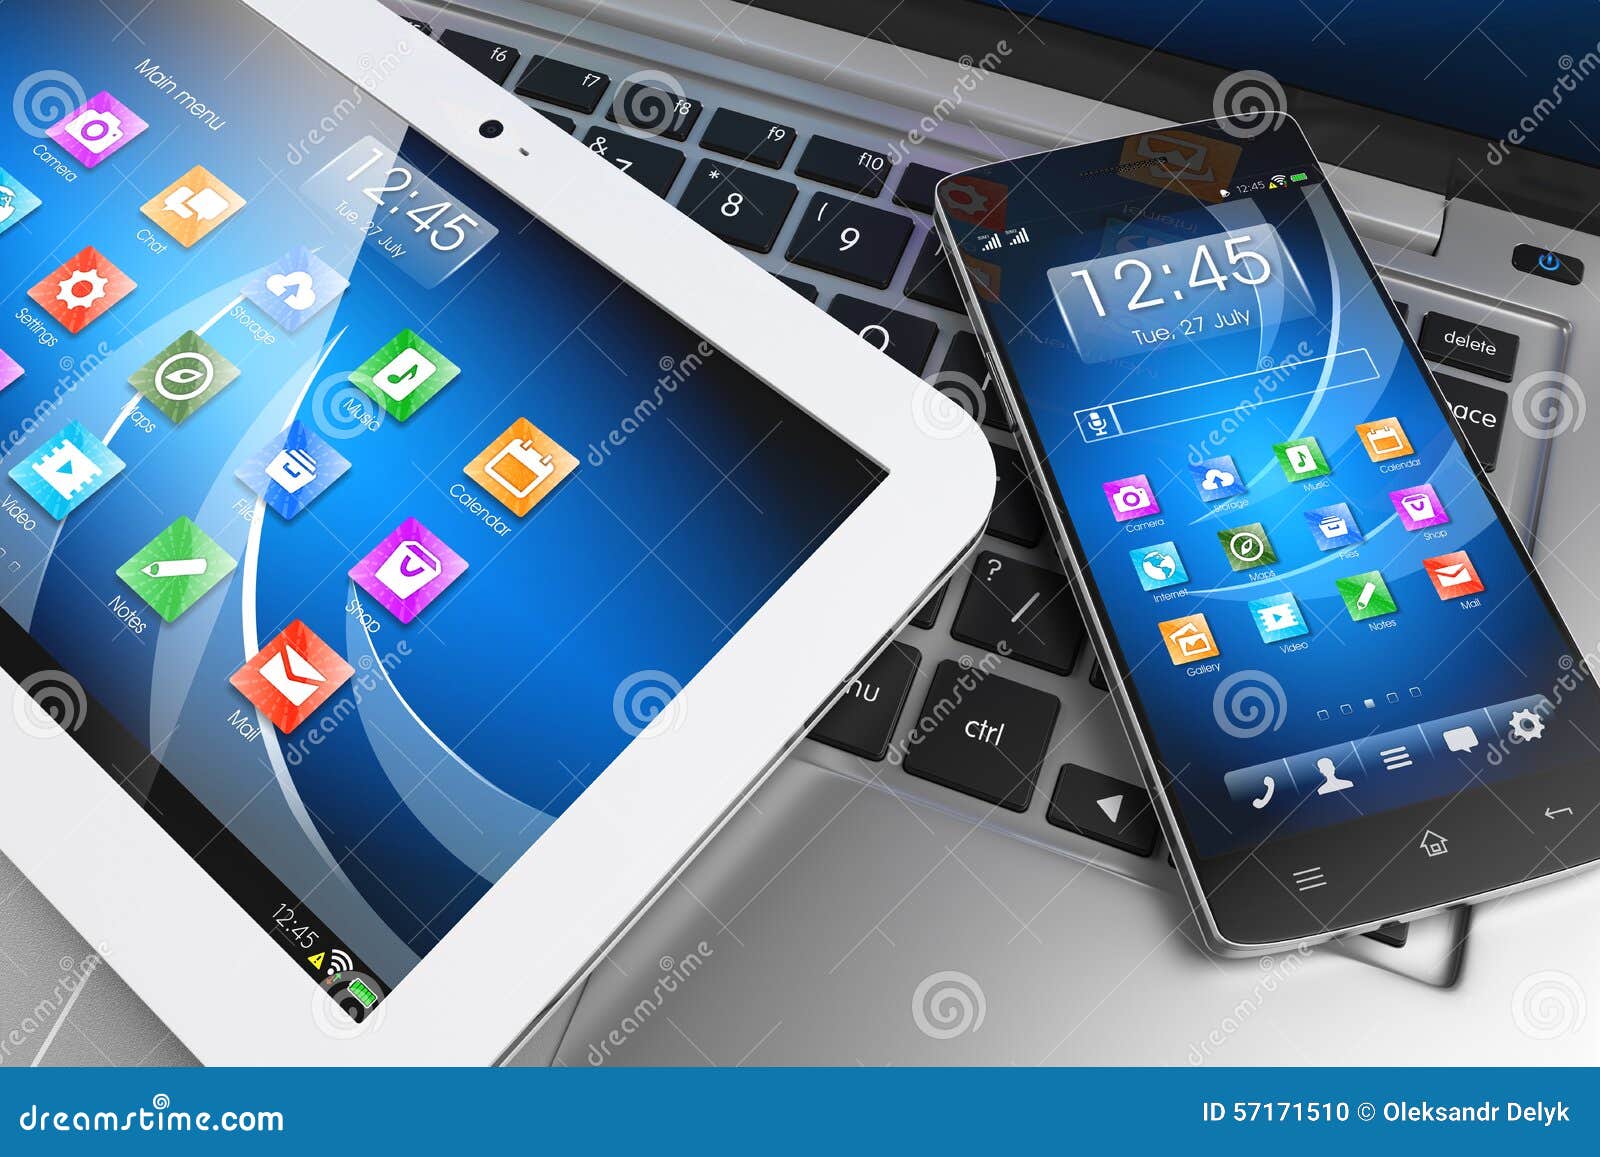 mobile devices. tablet pc, smartphone on laptop, technology conc